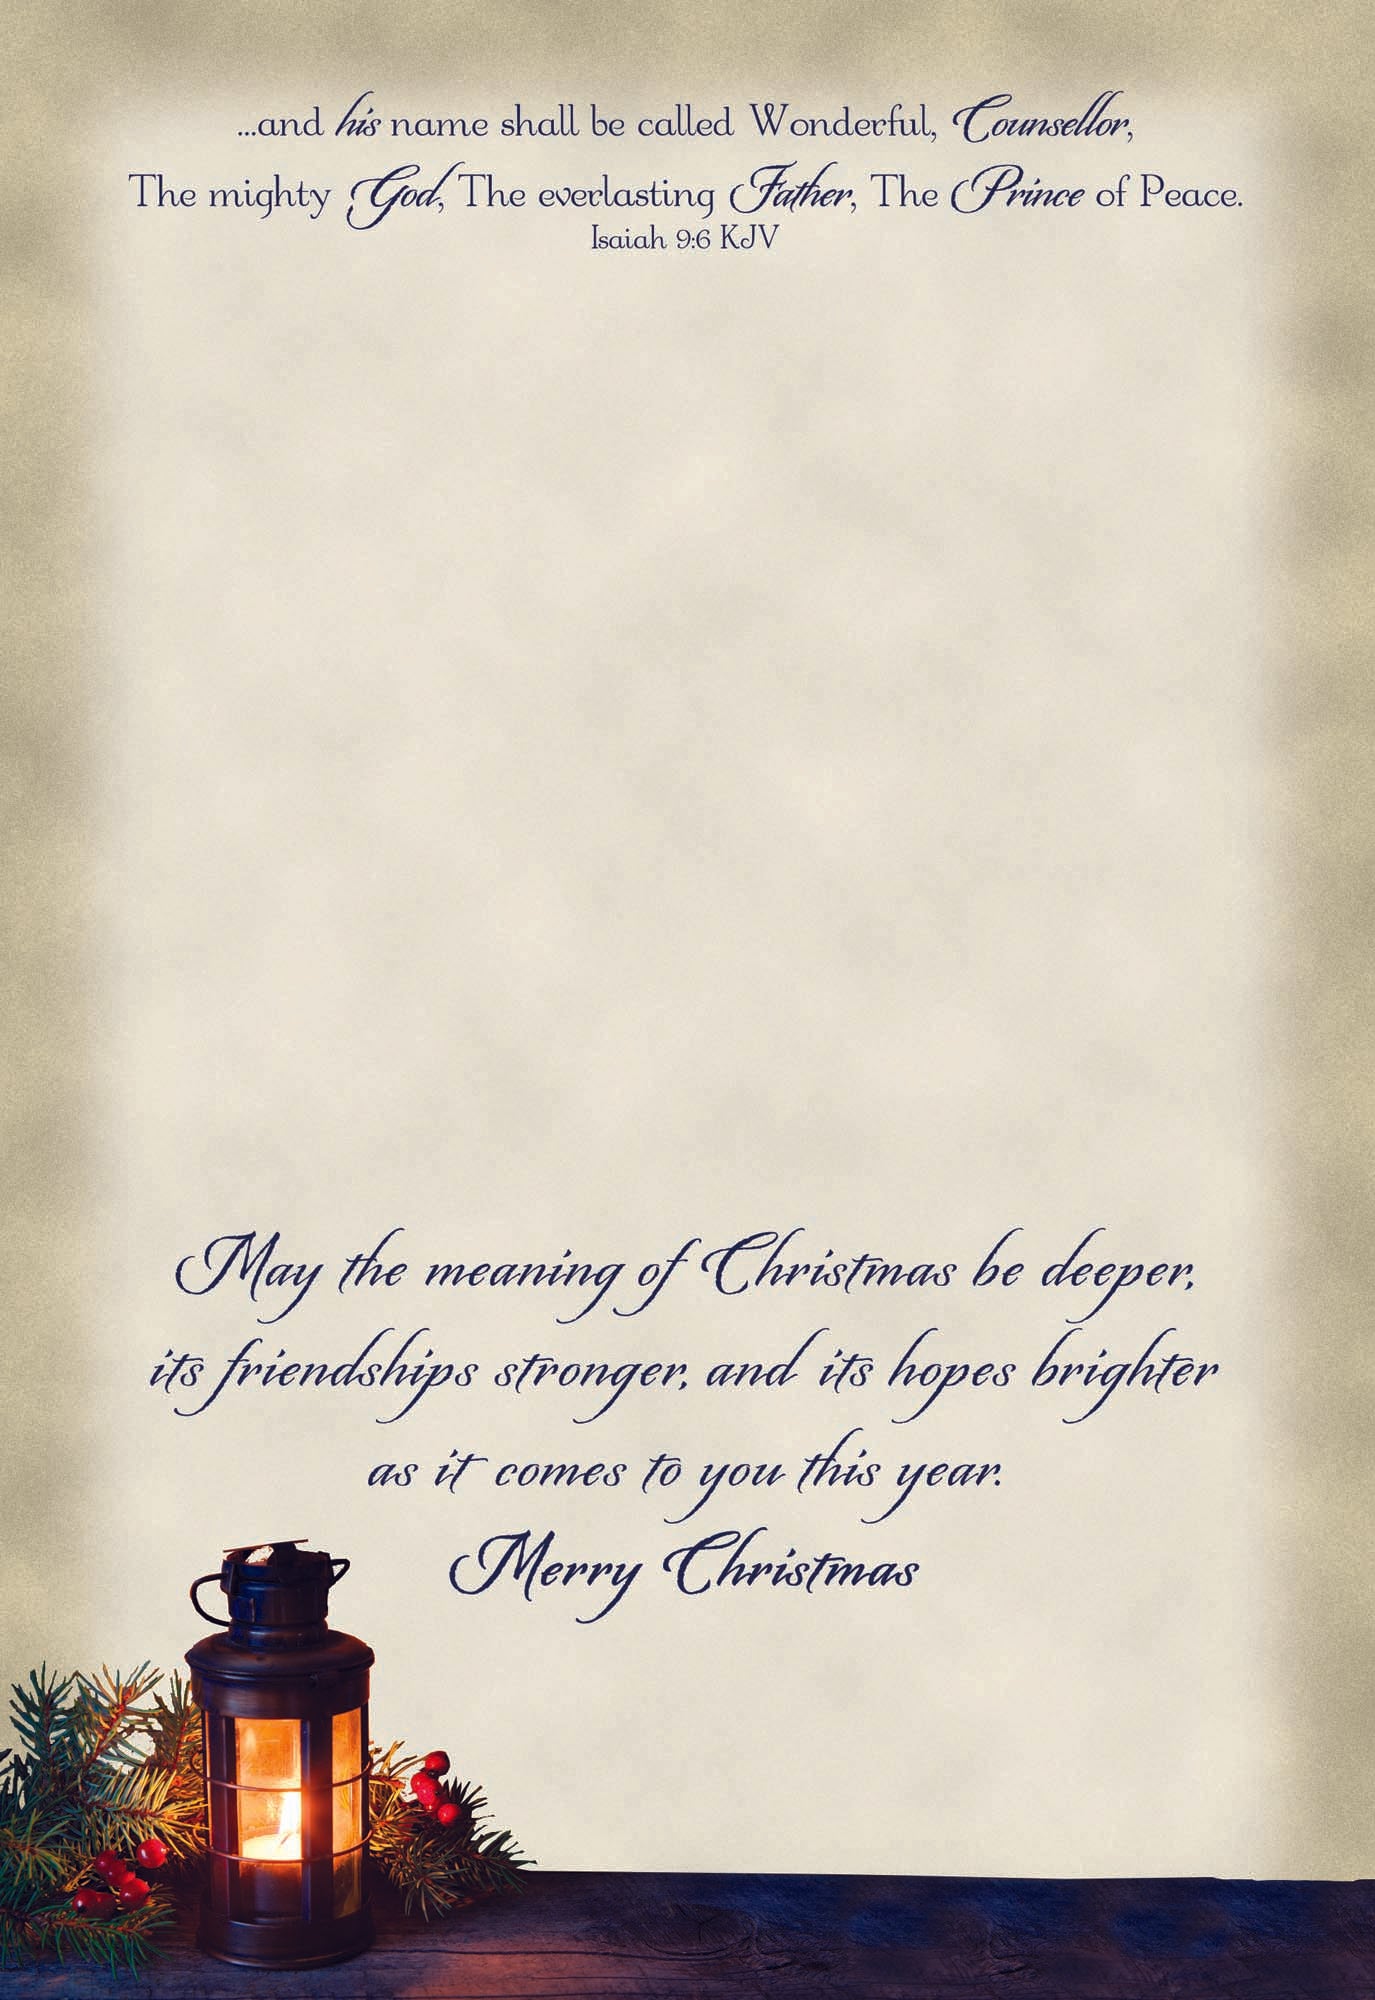 Christmas Blessings - Large Christmas Card Boxed Assortment with KJV Scripture